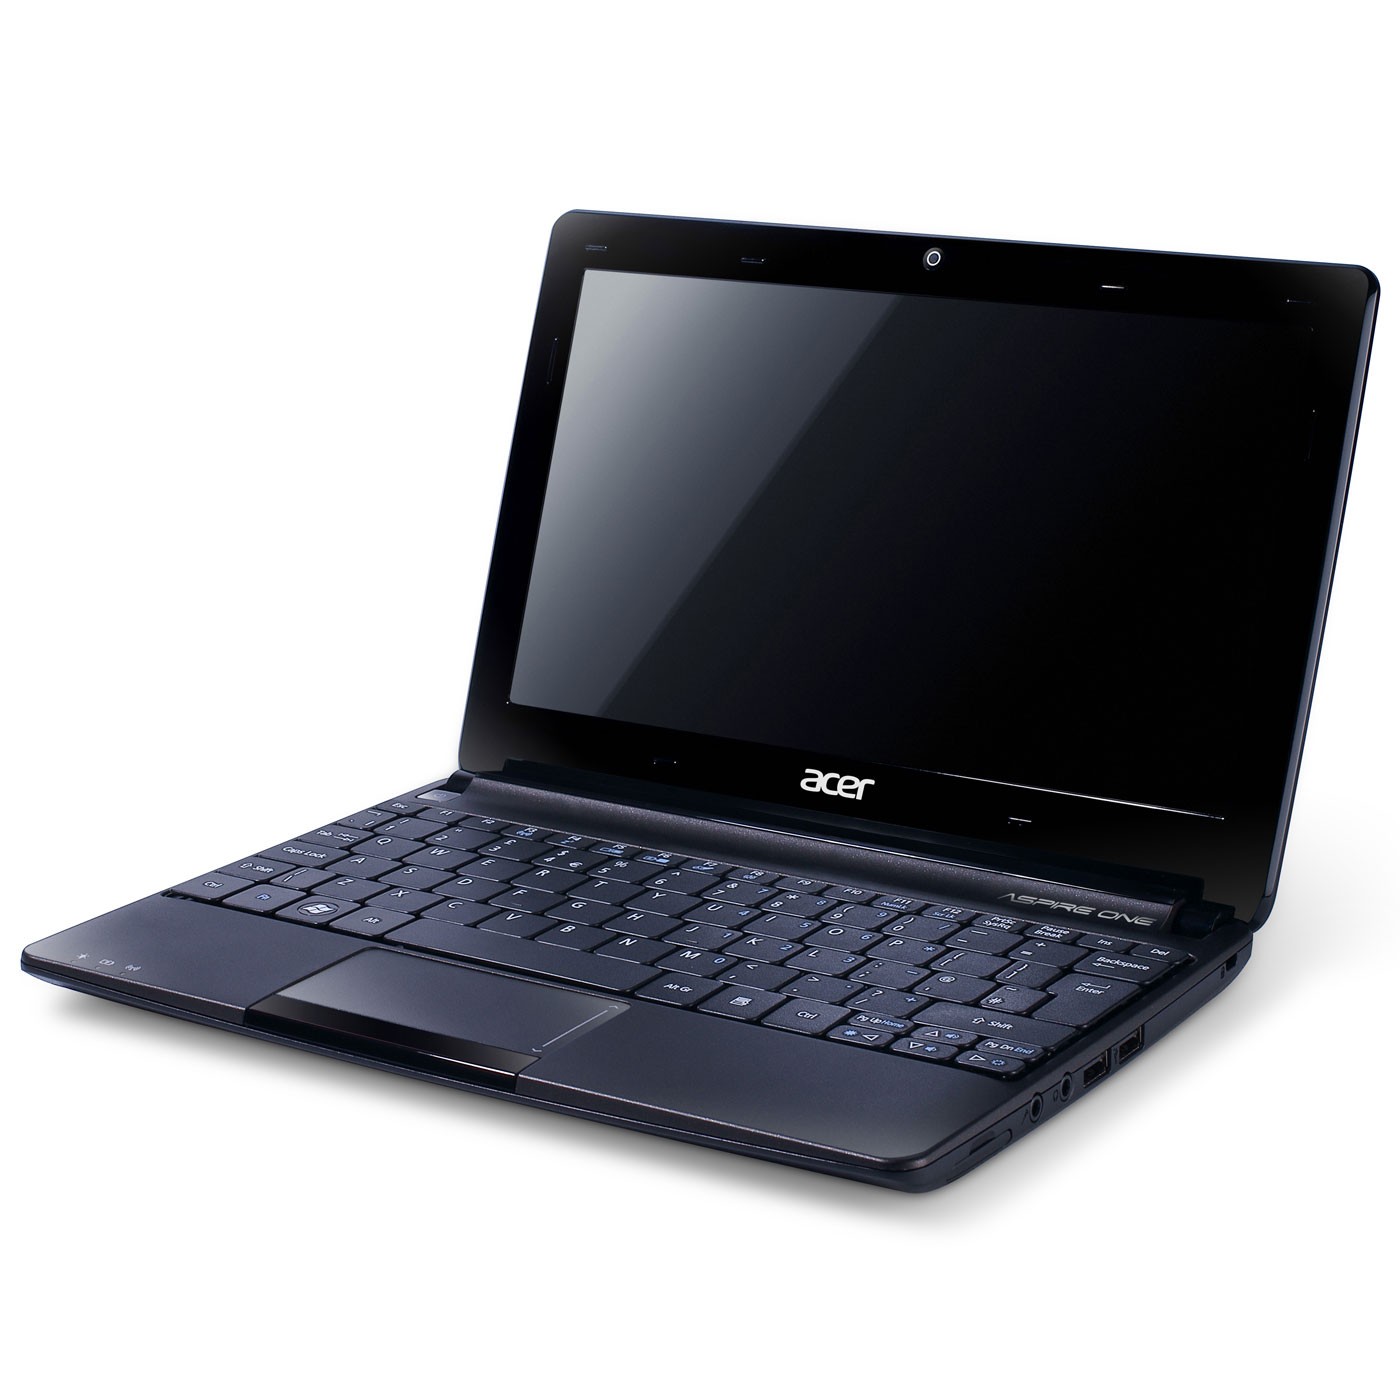 Acer Aspire One D270-N261G326ck - Pc portable ...